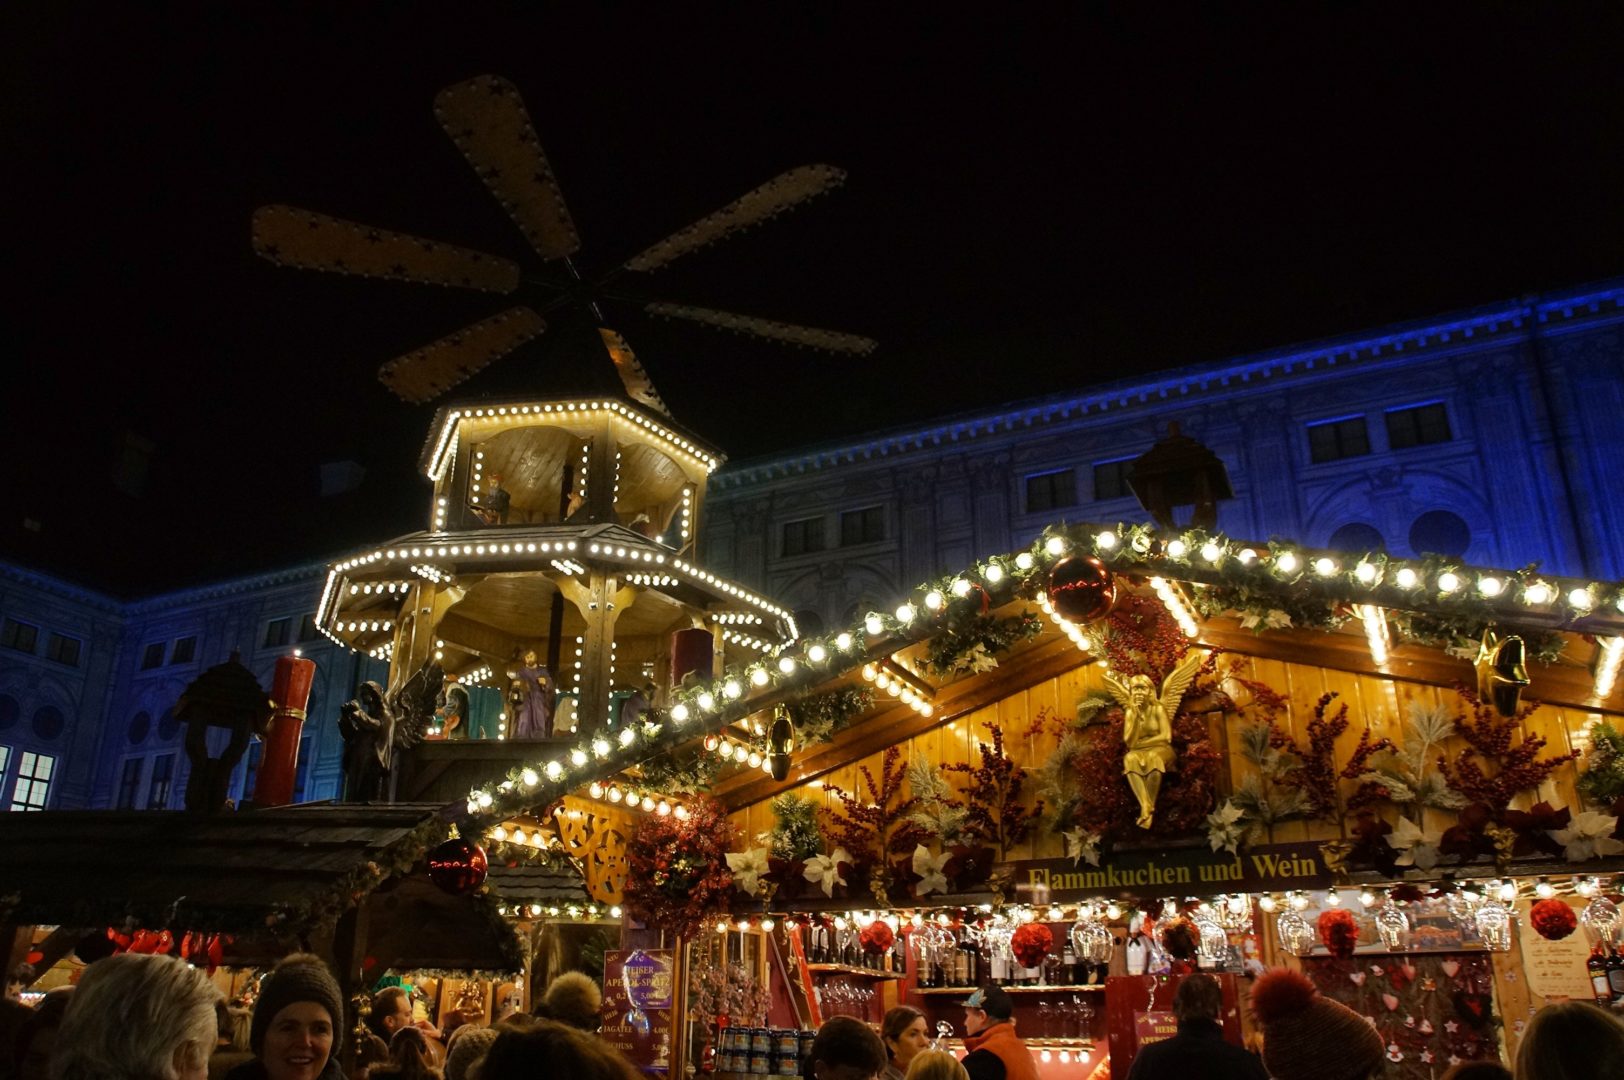 Christmas Market Munich - people standing at a Christmas market stall